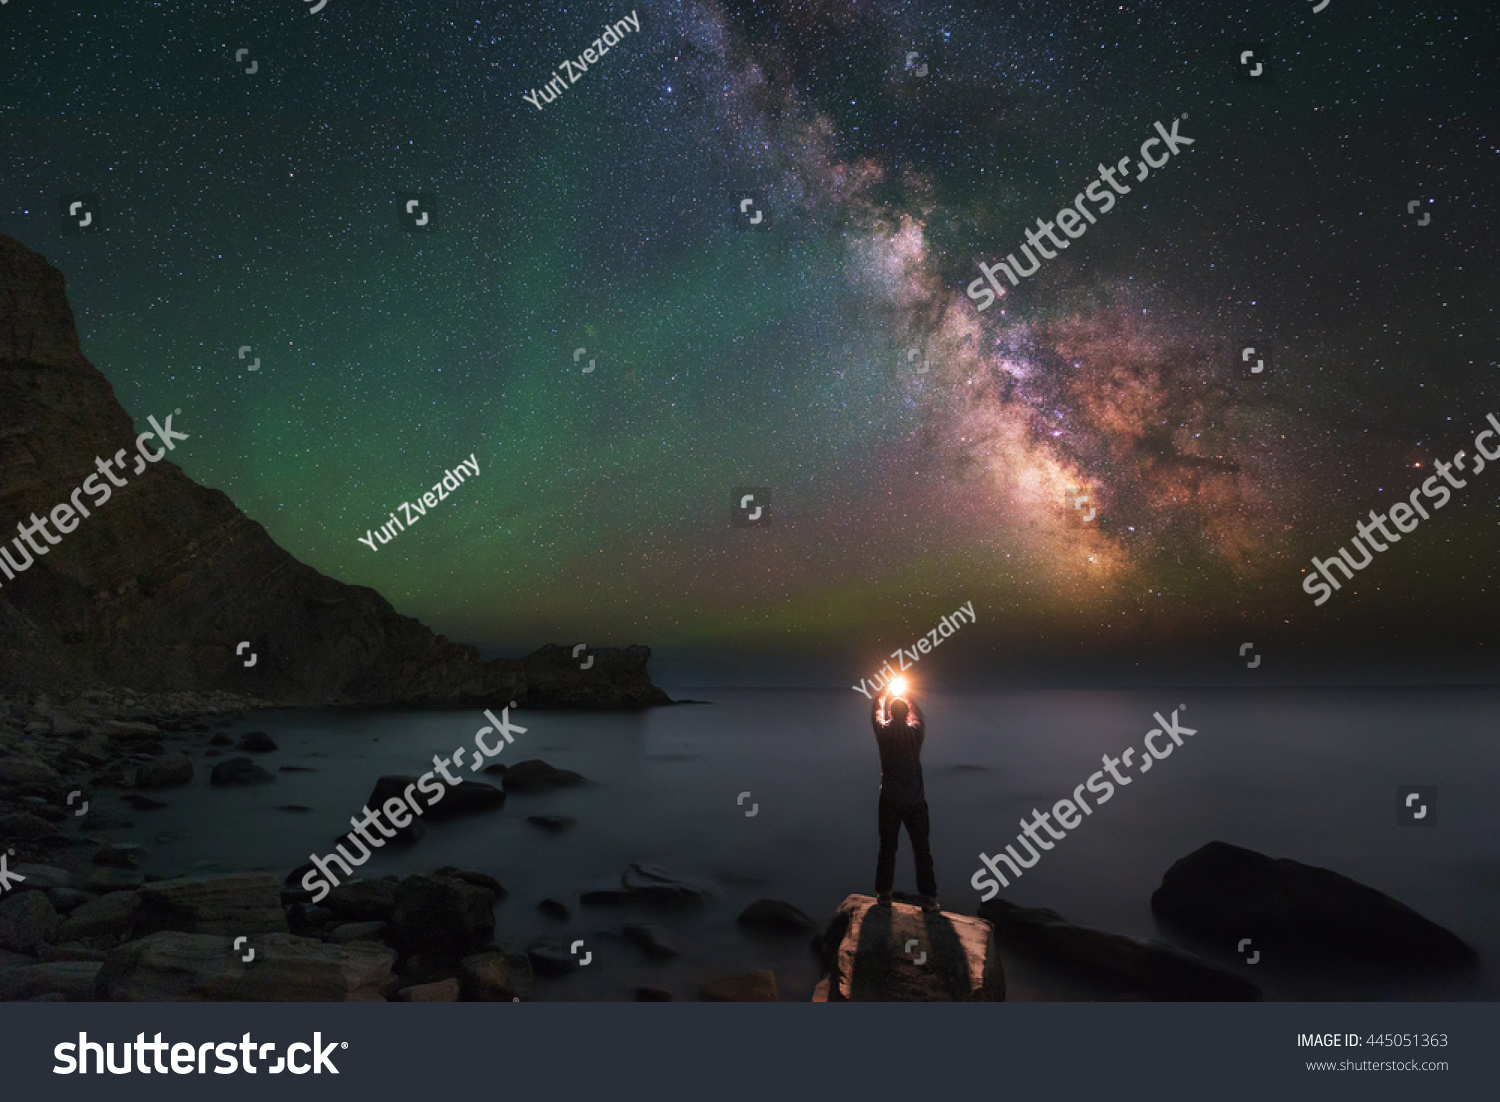 Man and Universe, shore of the ocean, sea, fire and stars in hands, in palms, igniting stars, Inspiration photo, unity the man and universe, astronomy and astrophotography, Milky Way, green airglow #445051363